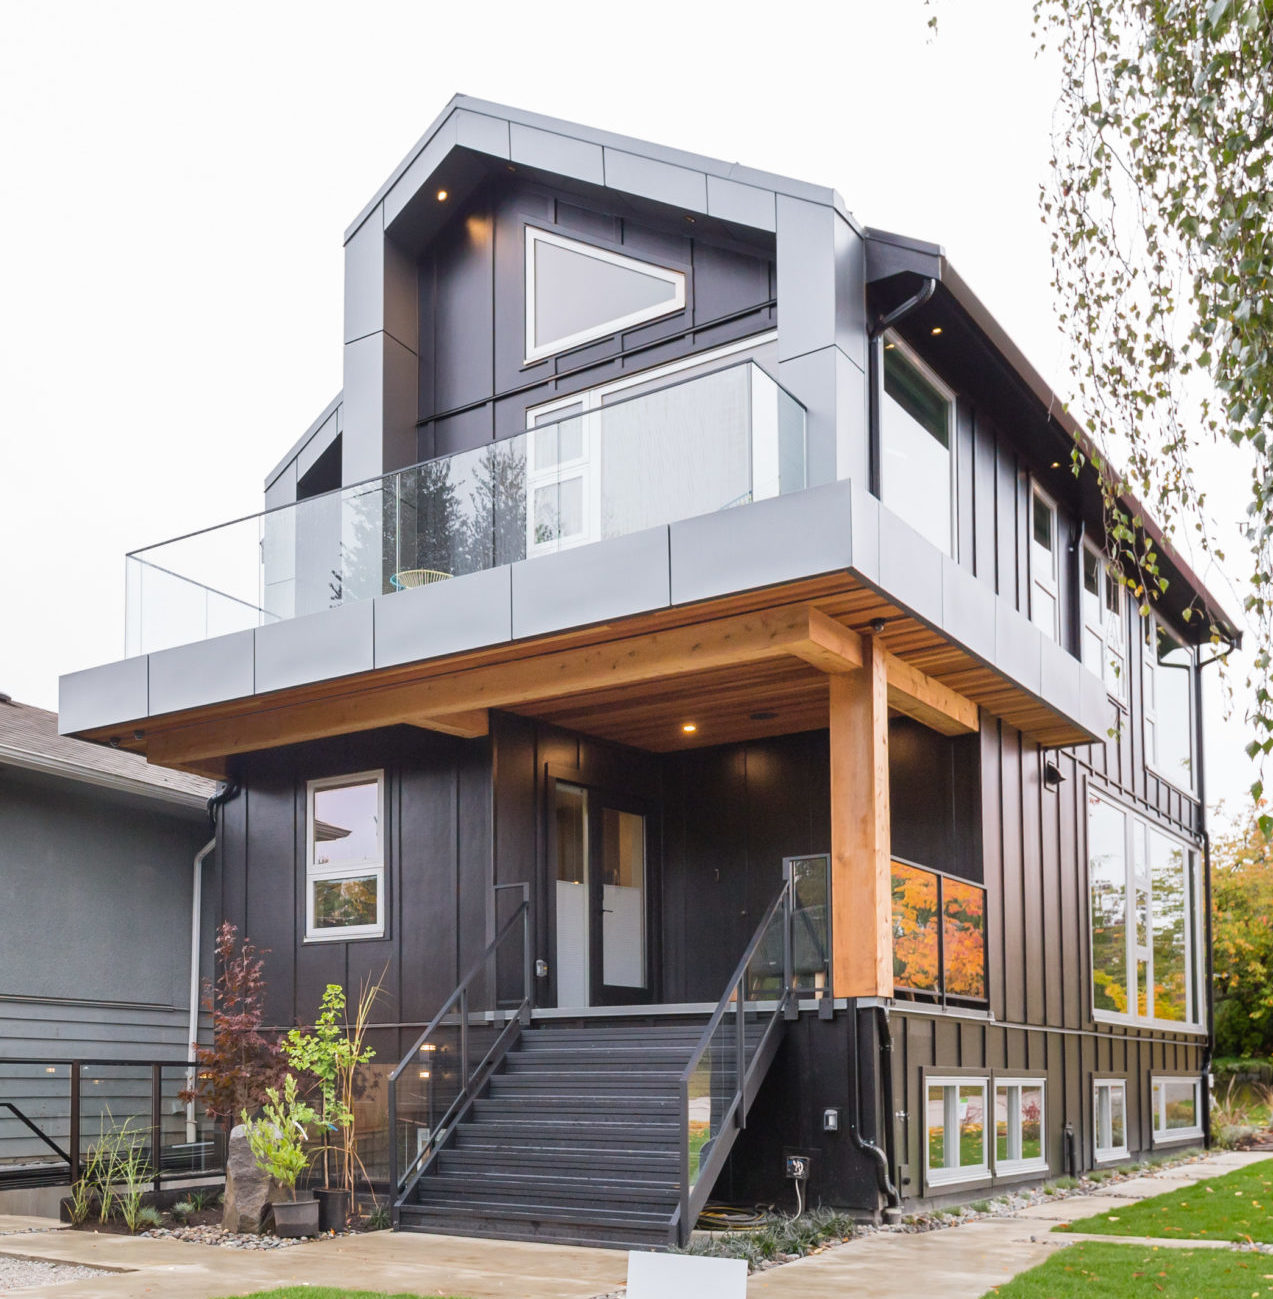 VANCOUVER CONTEMPORARY HOME - East 26th Avenue